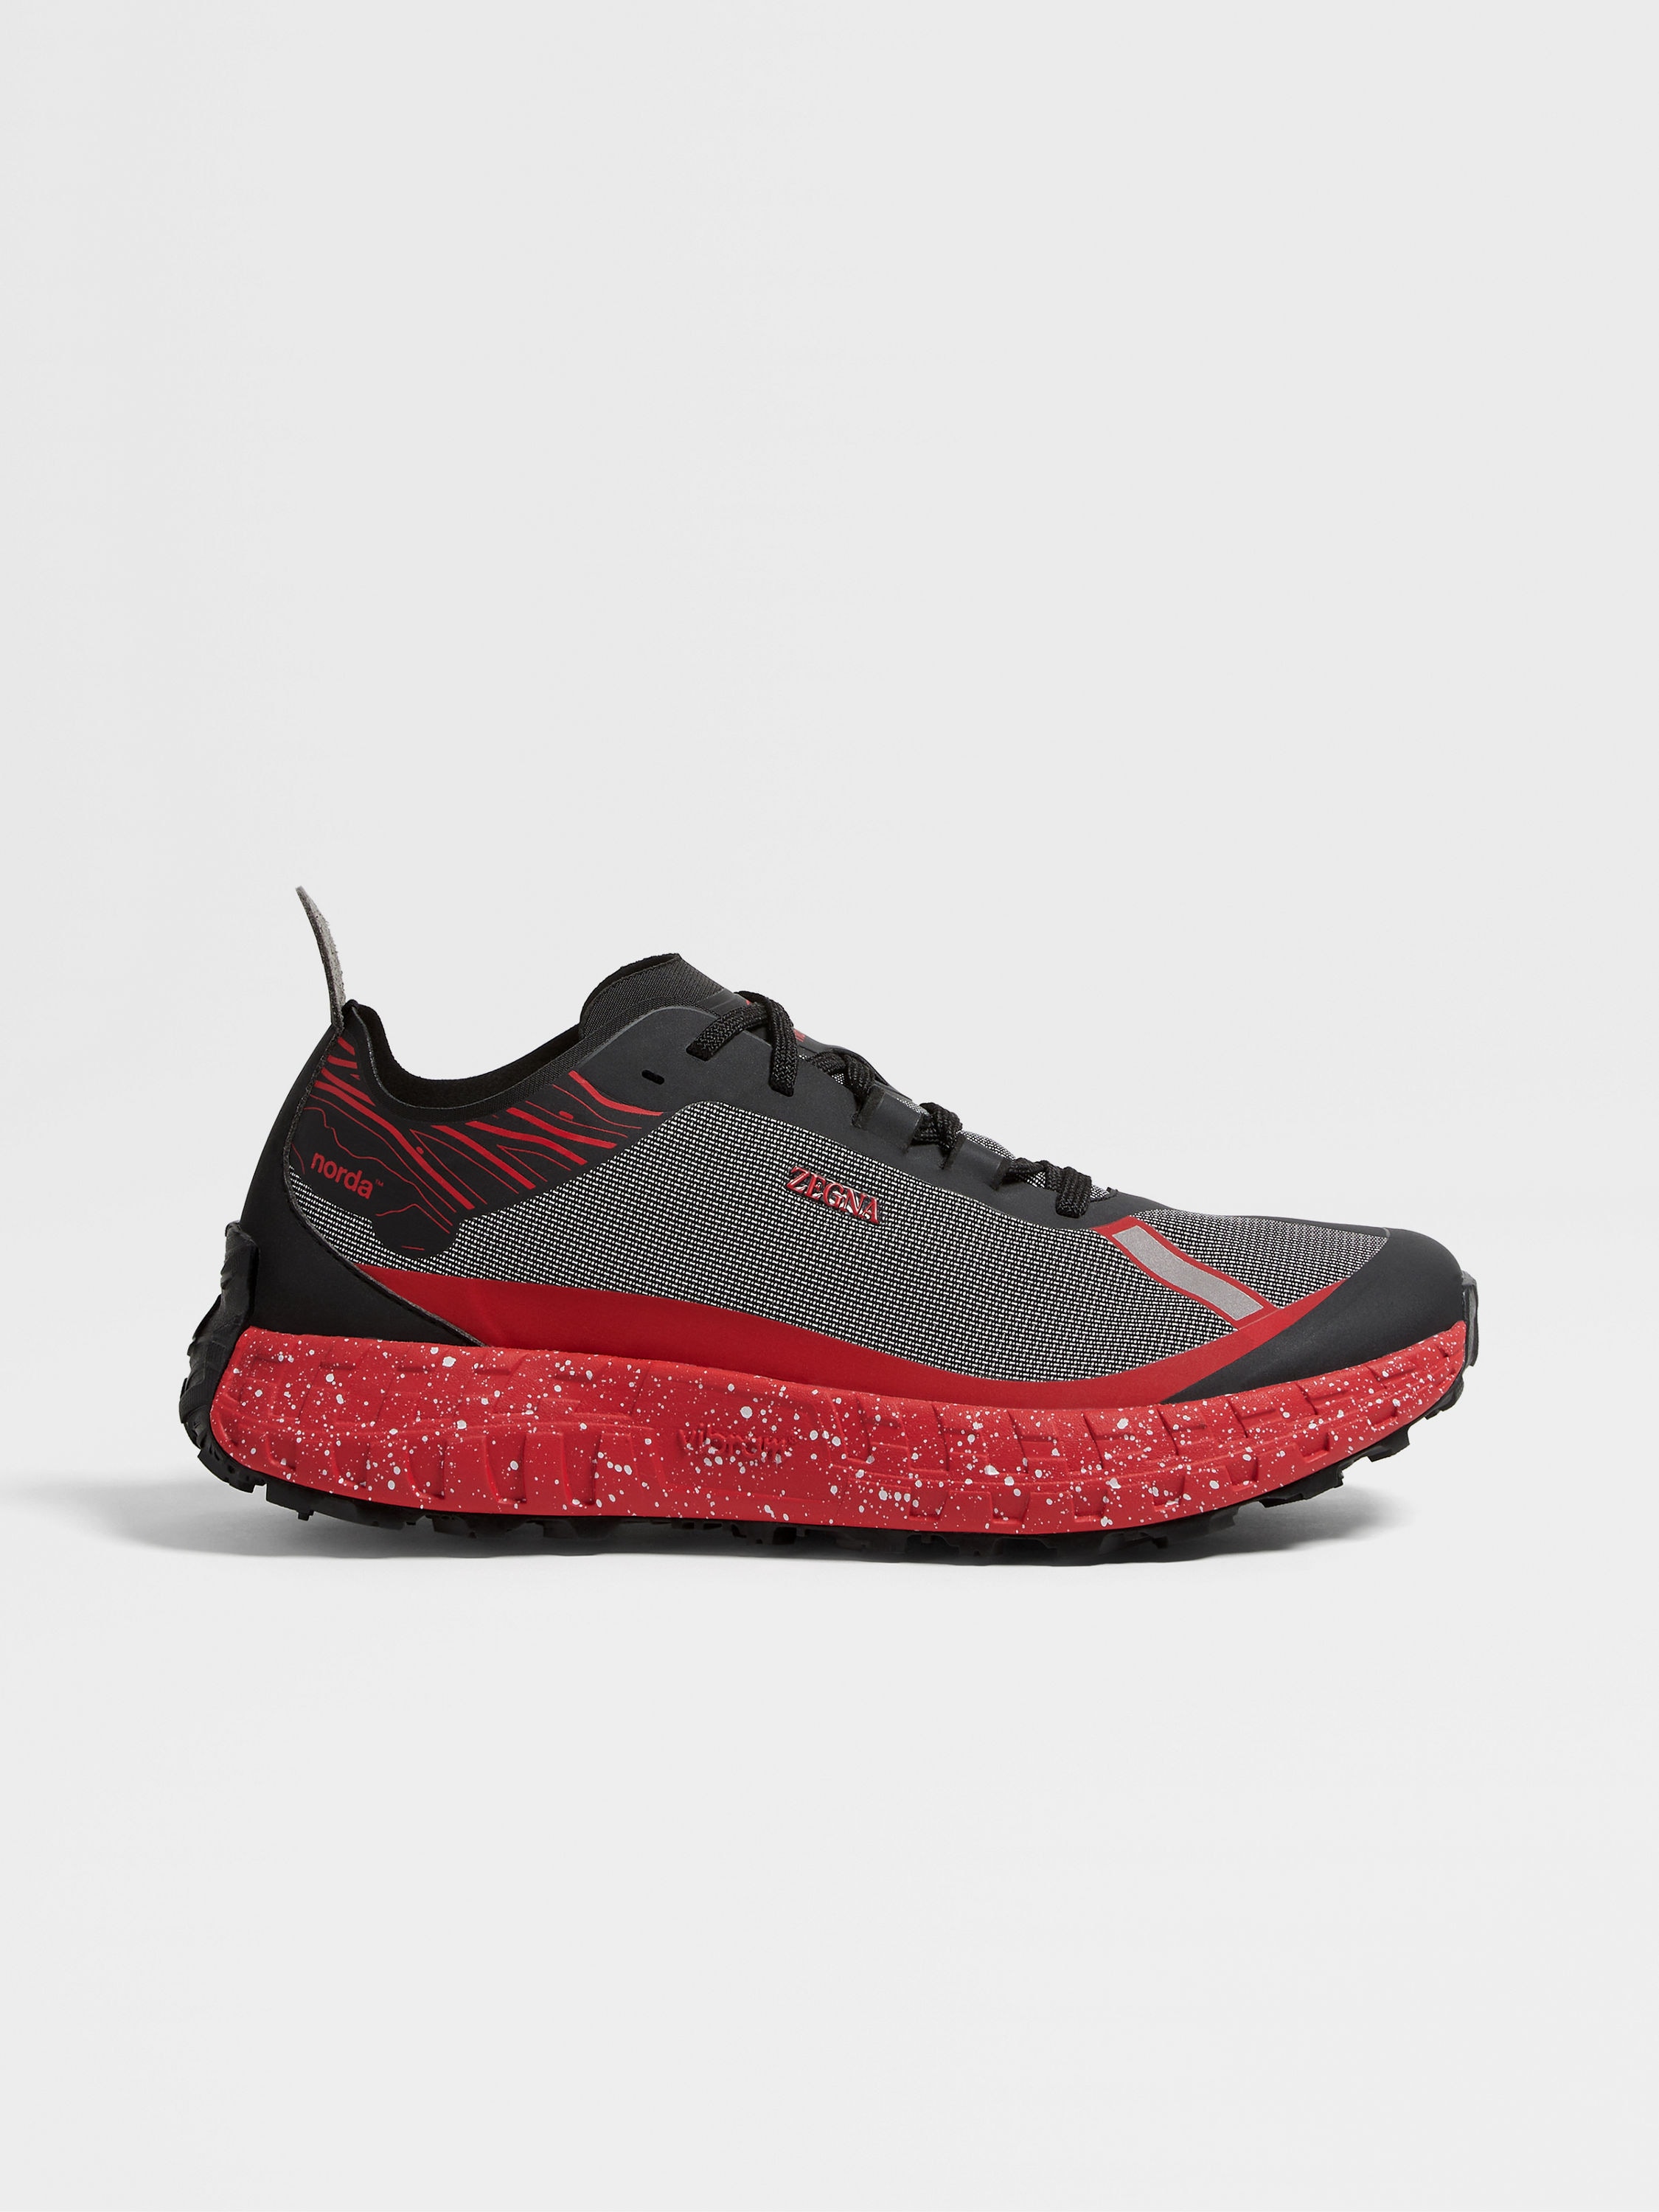 ZEGNA x norda™ 001 Red and Black Technical Fabric Sneakers